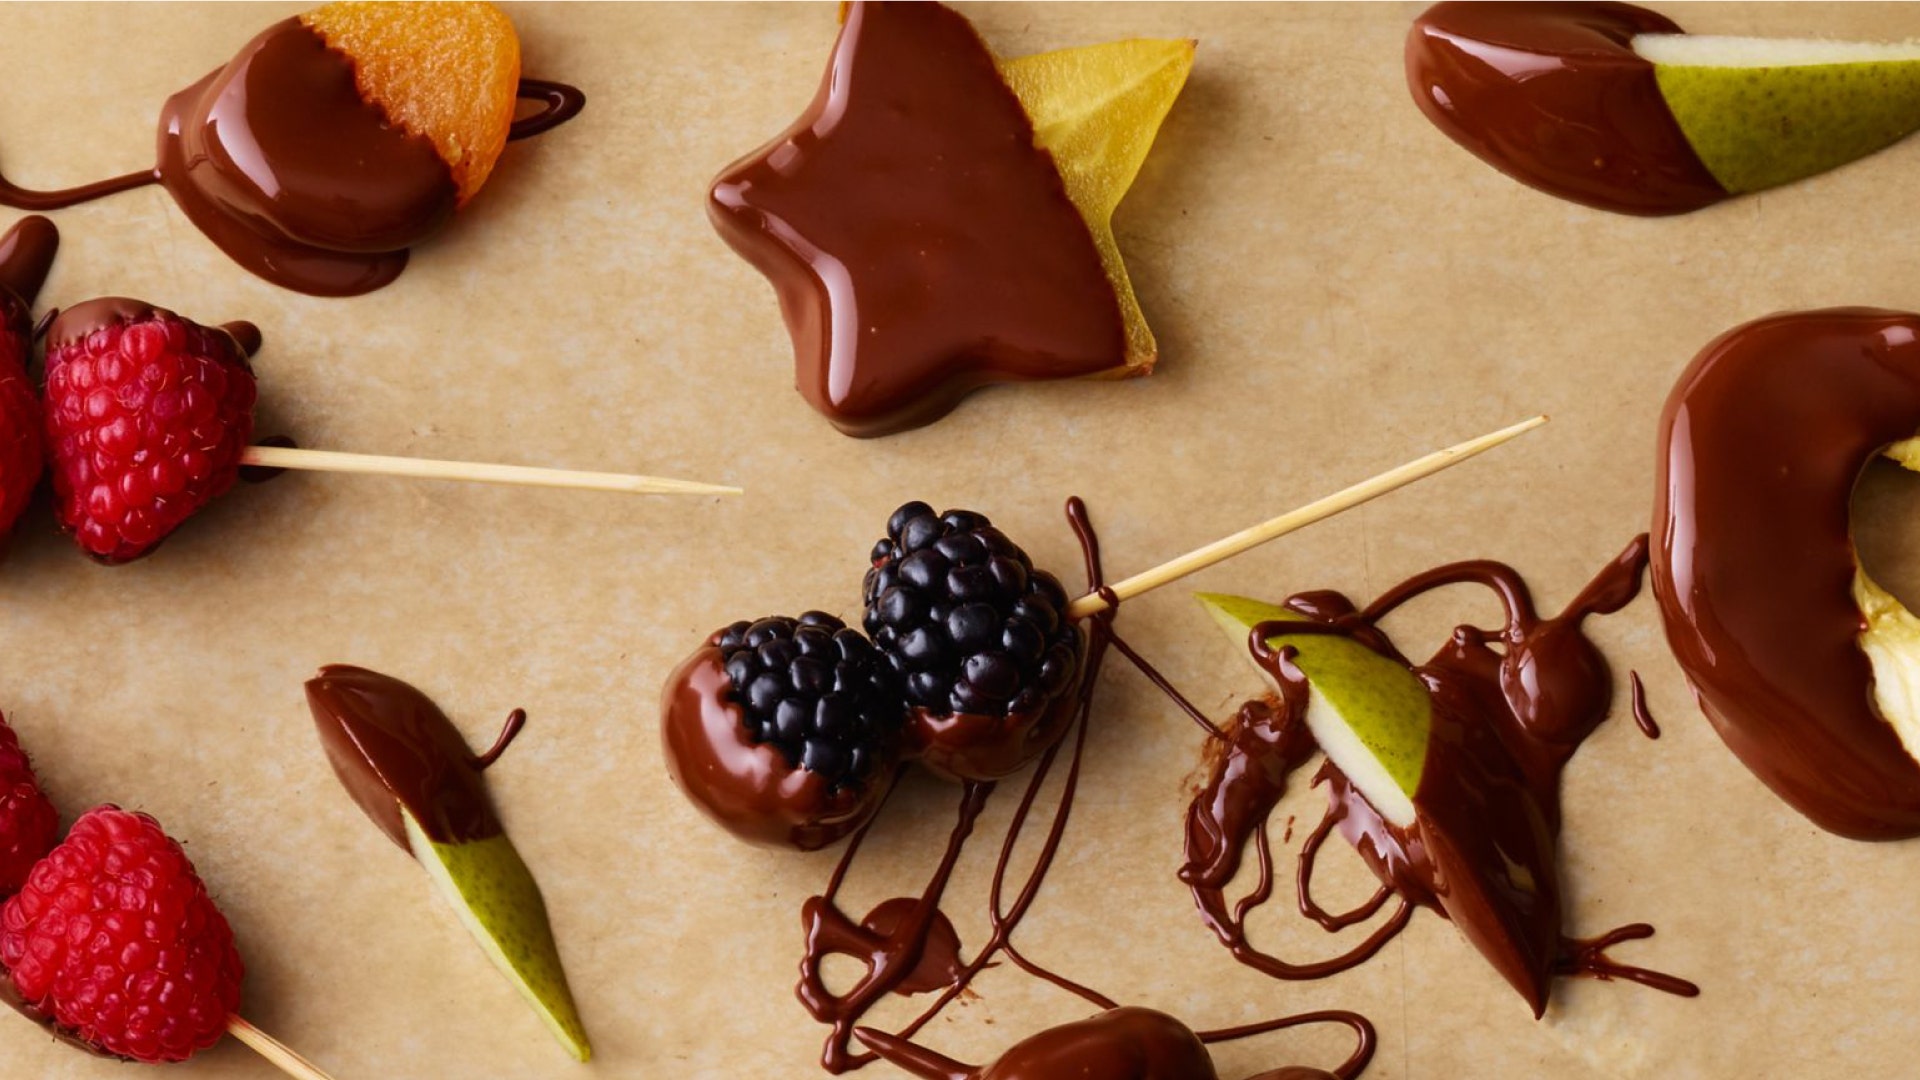 Image of Chocolate Dipped Fruit